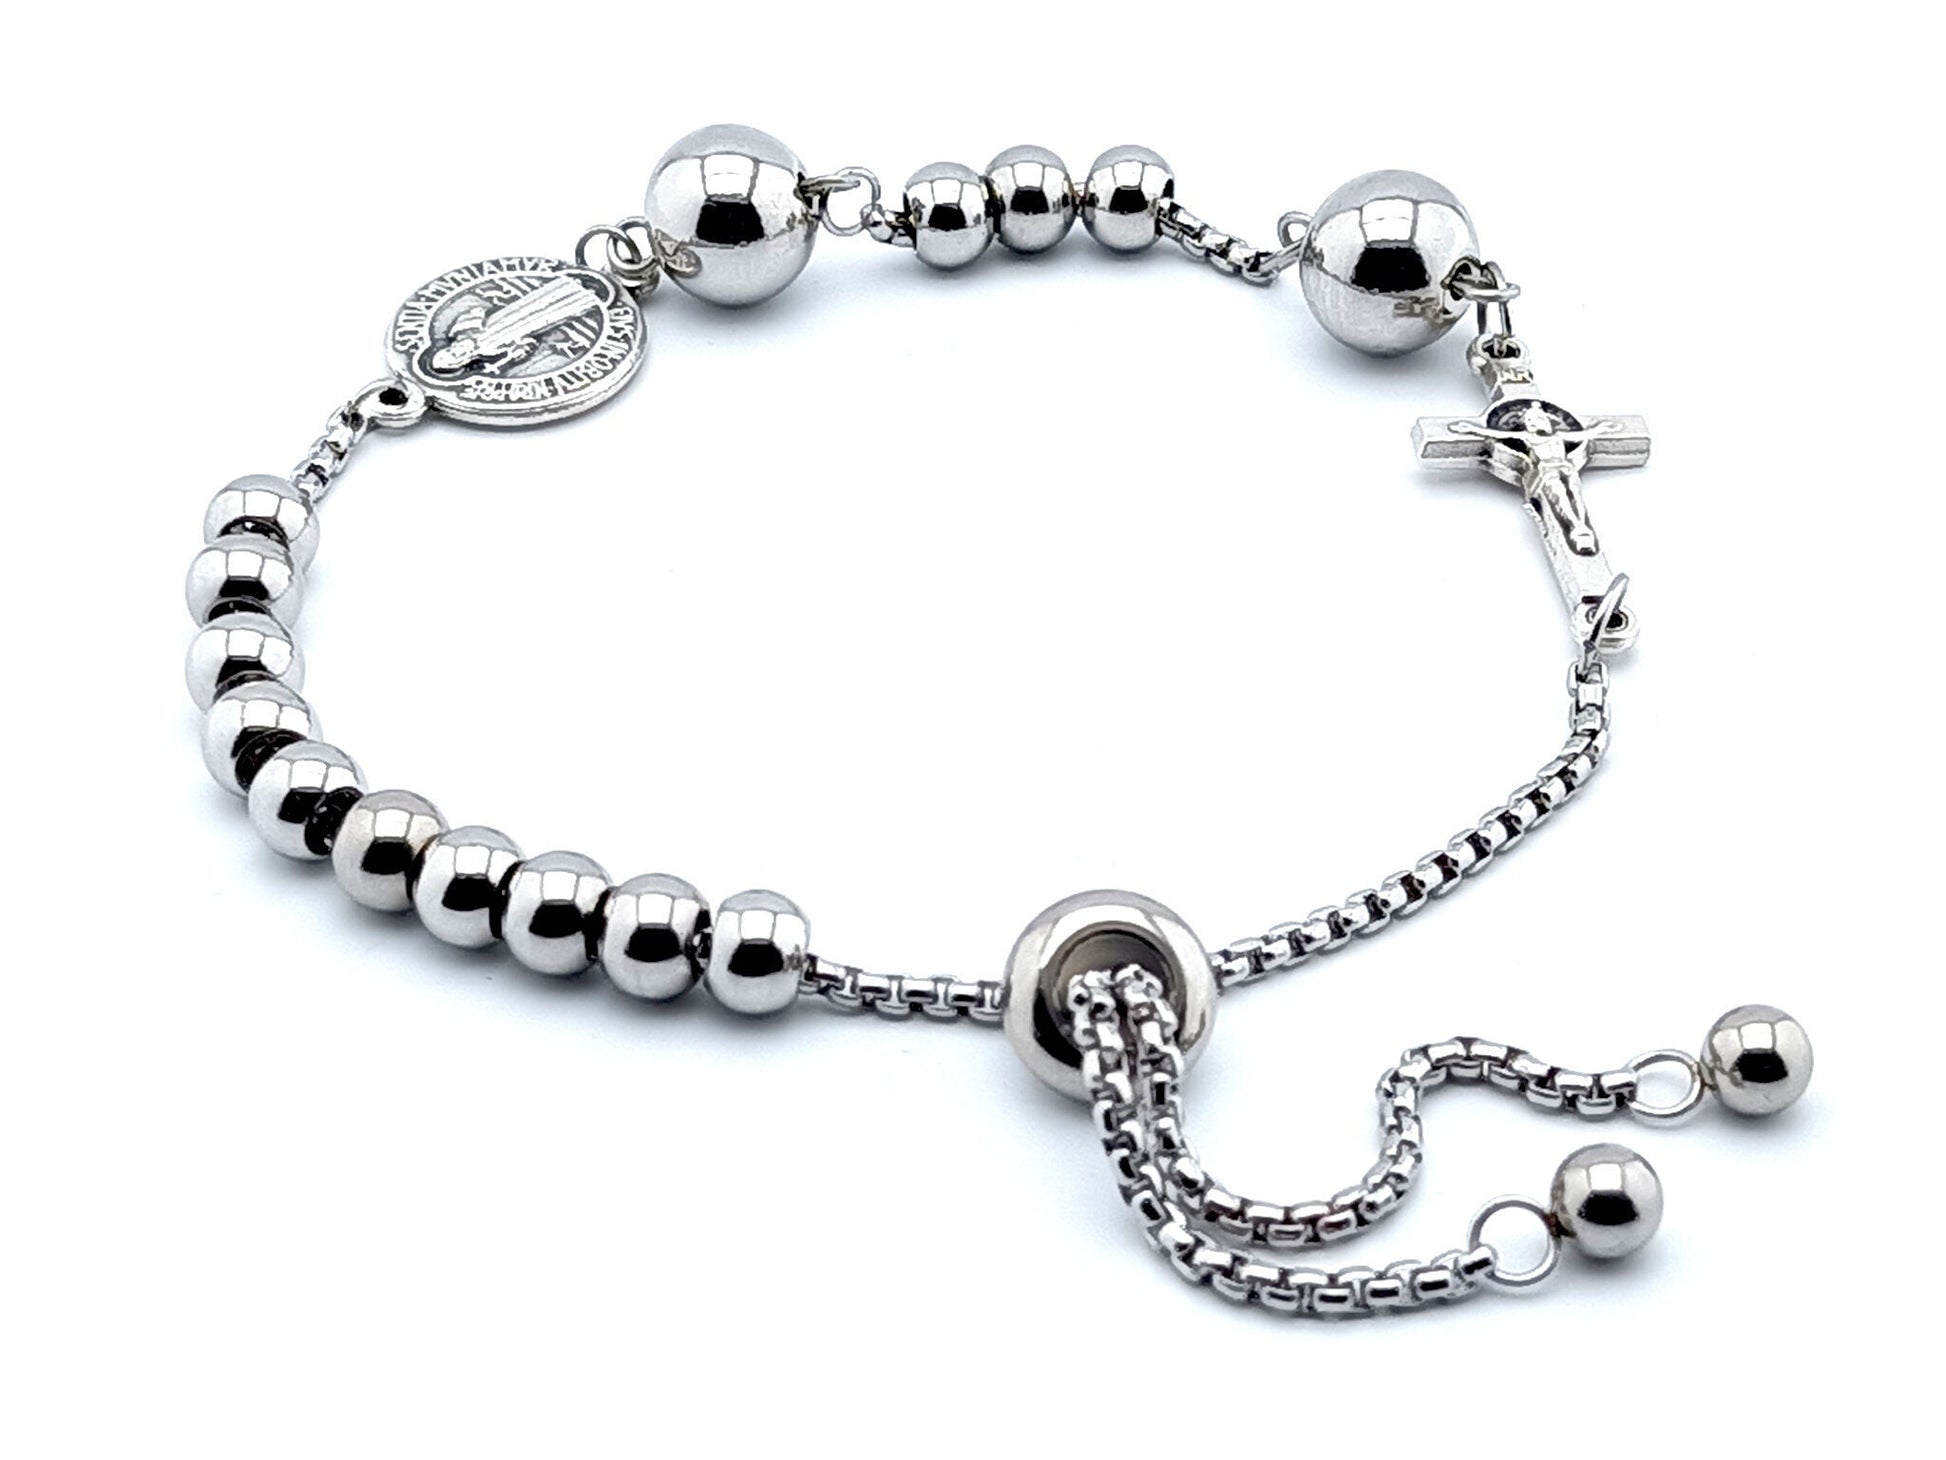 Saint Benedict unique rosary beads single decade rosary bracelet with stainless steel beads, silver plated linking crucifix and medal.